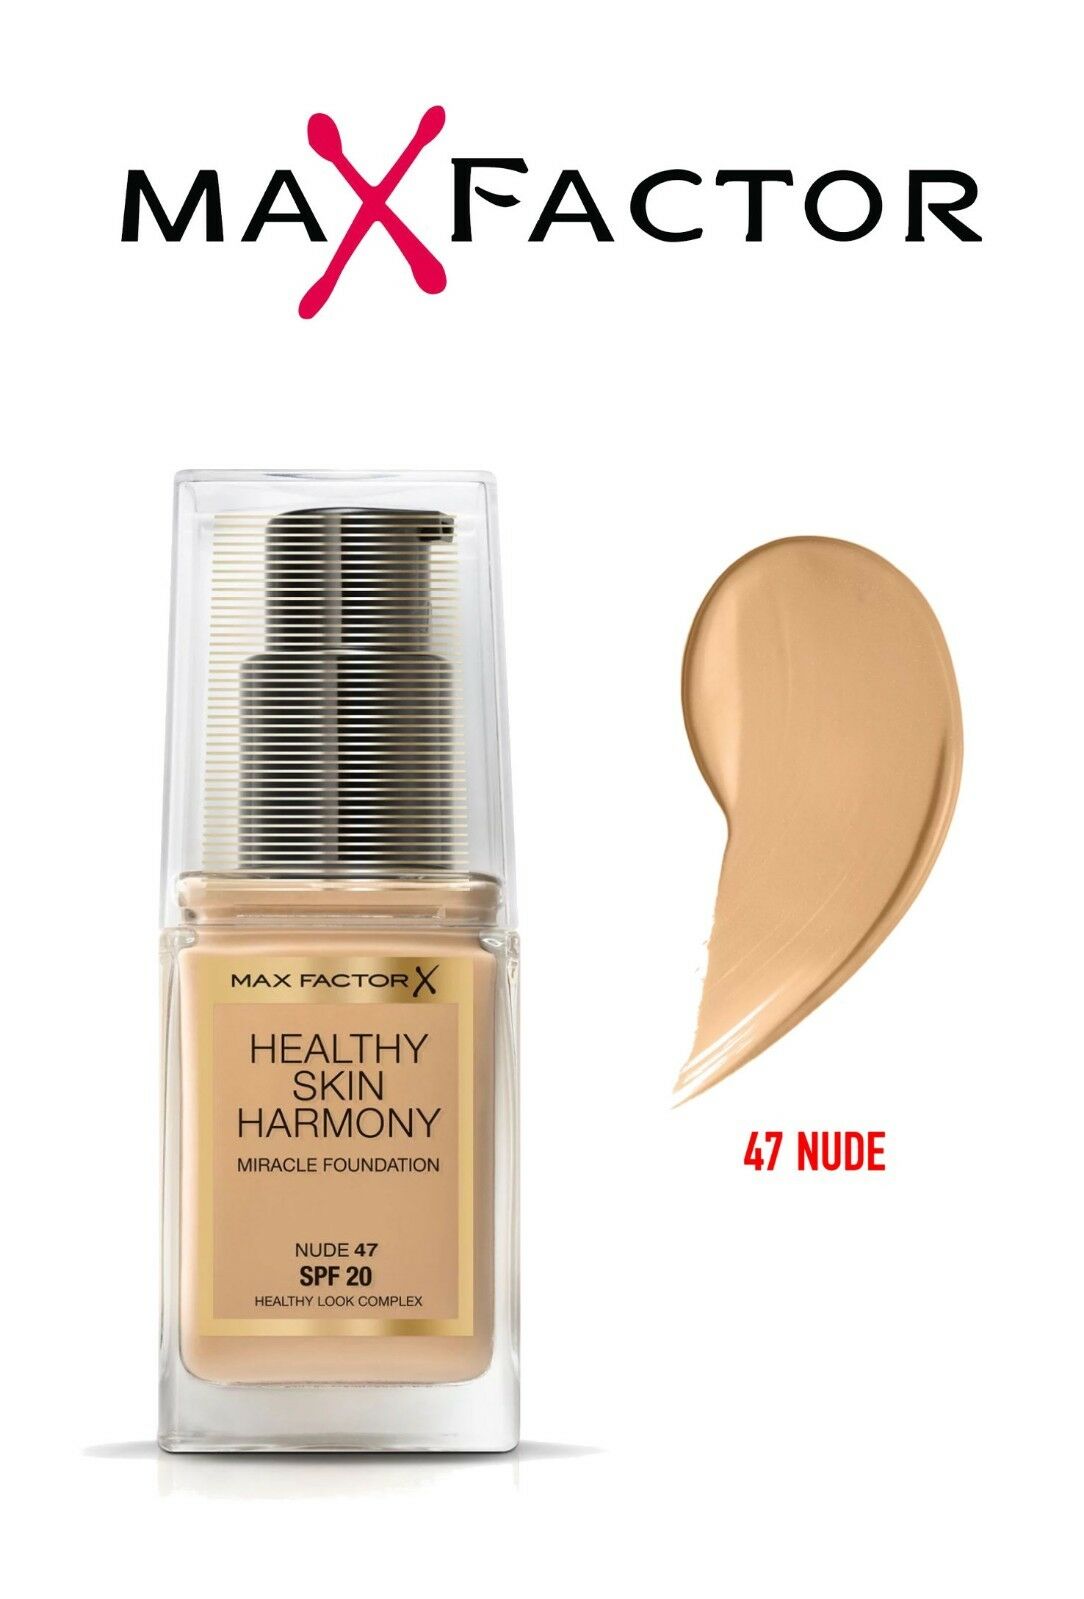 Maxfactor Healthy Mix Harmony Miracle Foundation 47 Nude